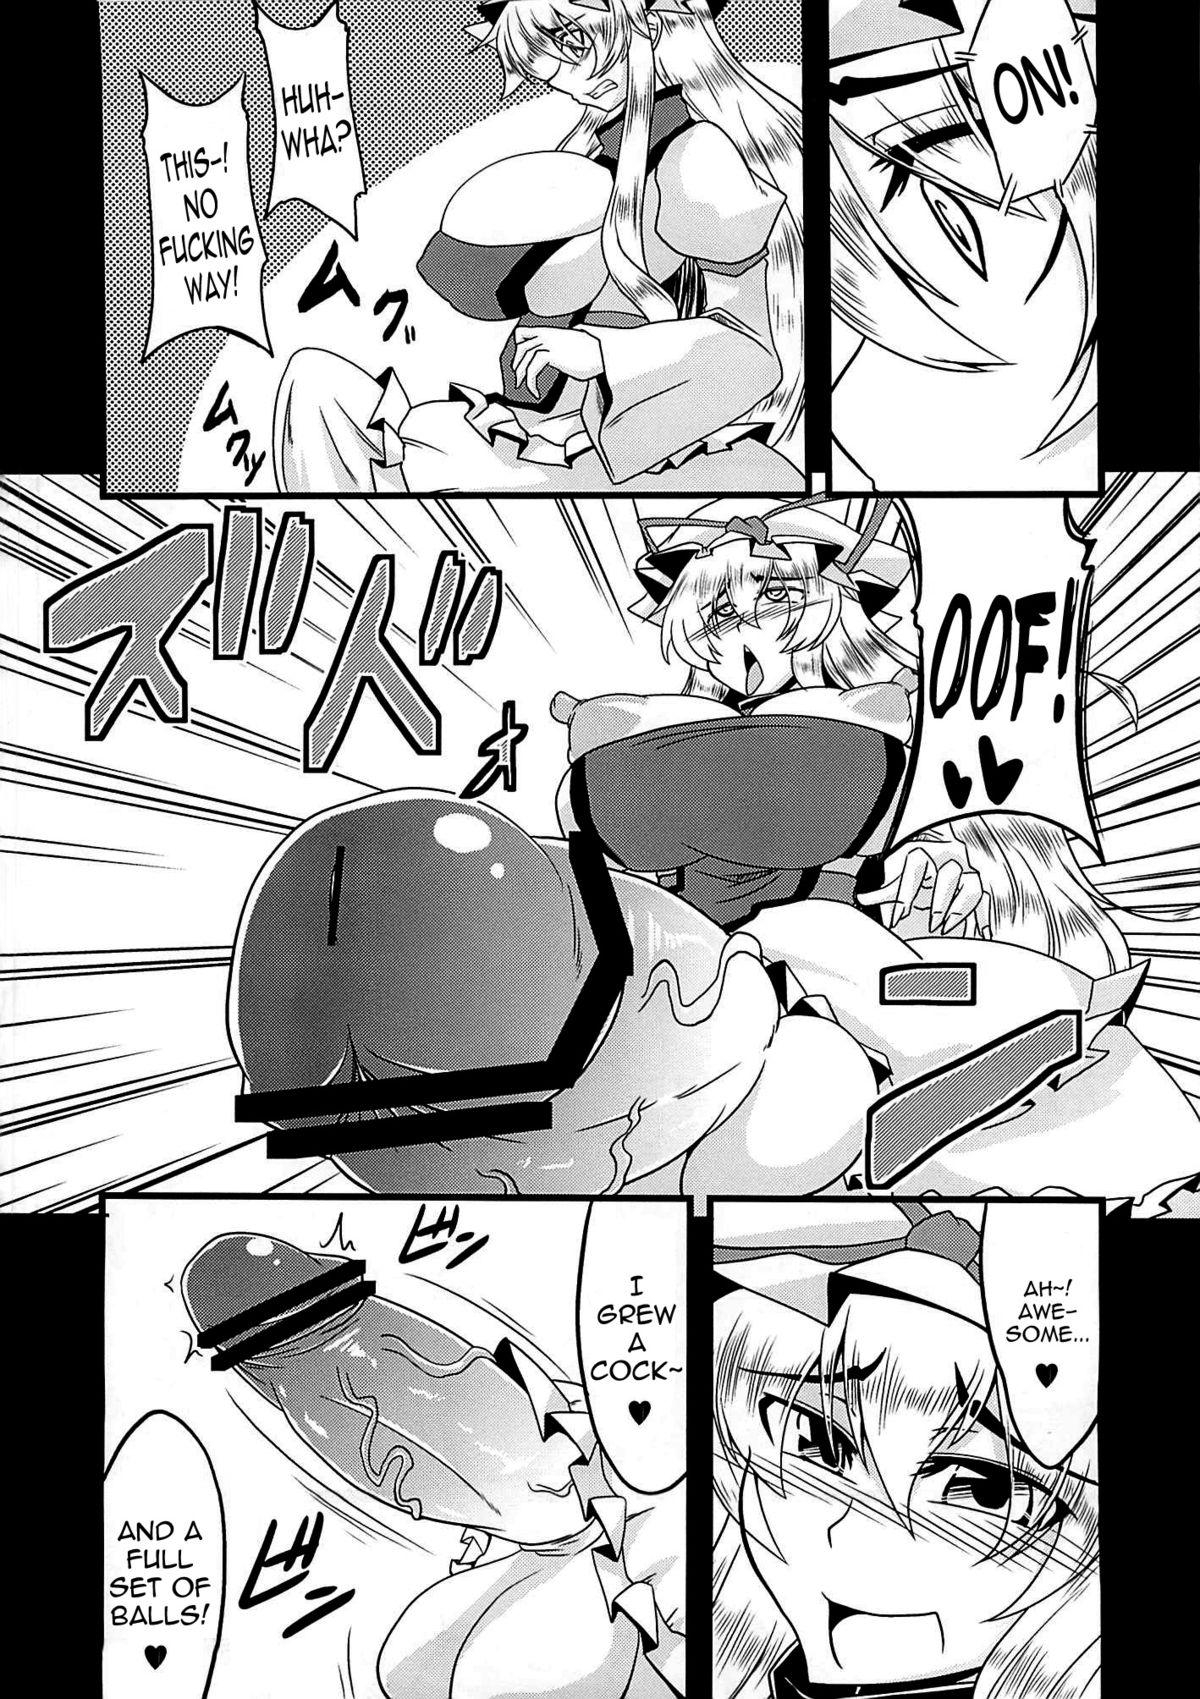 Tetas Grandes Illusionary Cock Story - Touhou project Shesafreak - Page 5